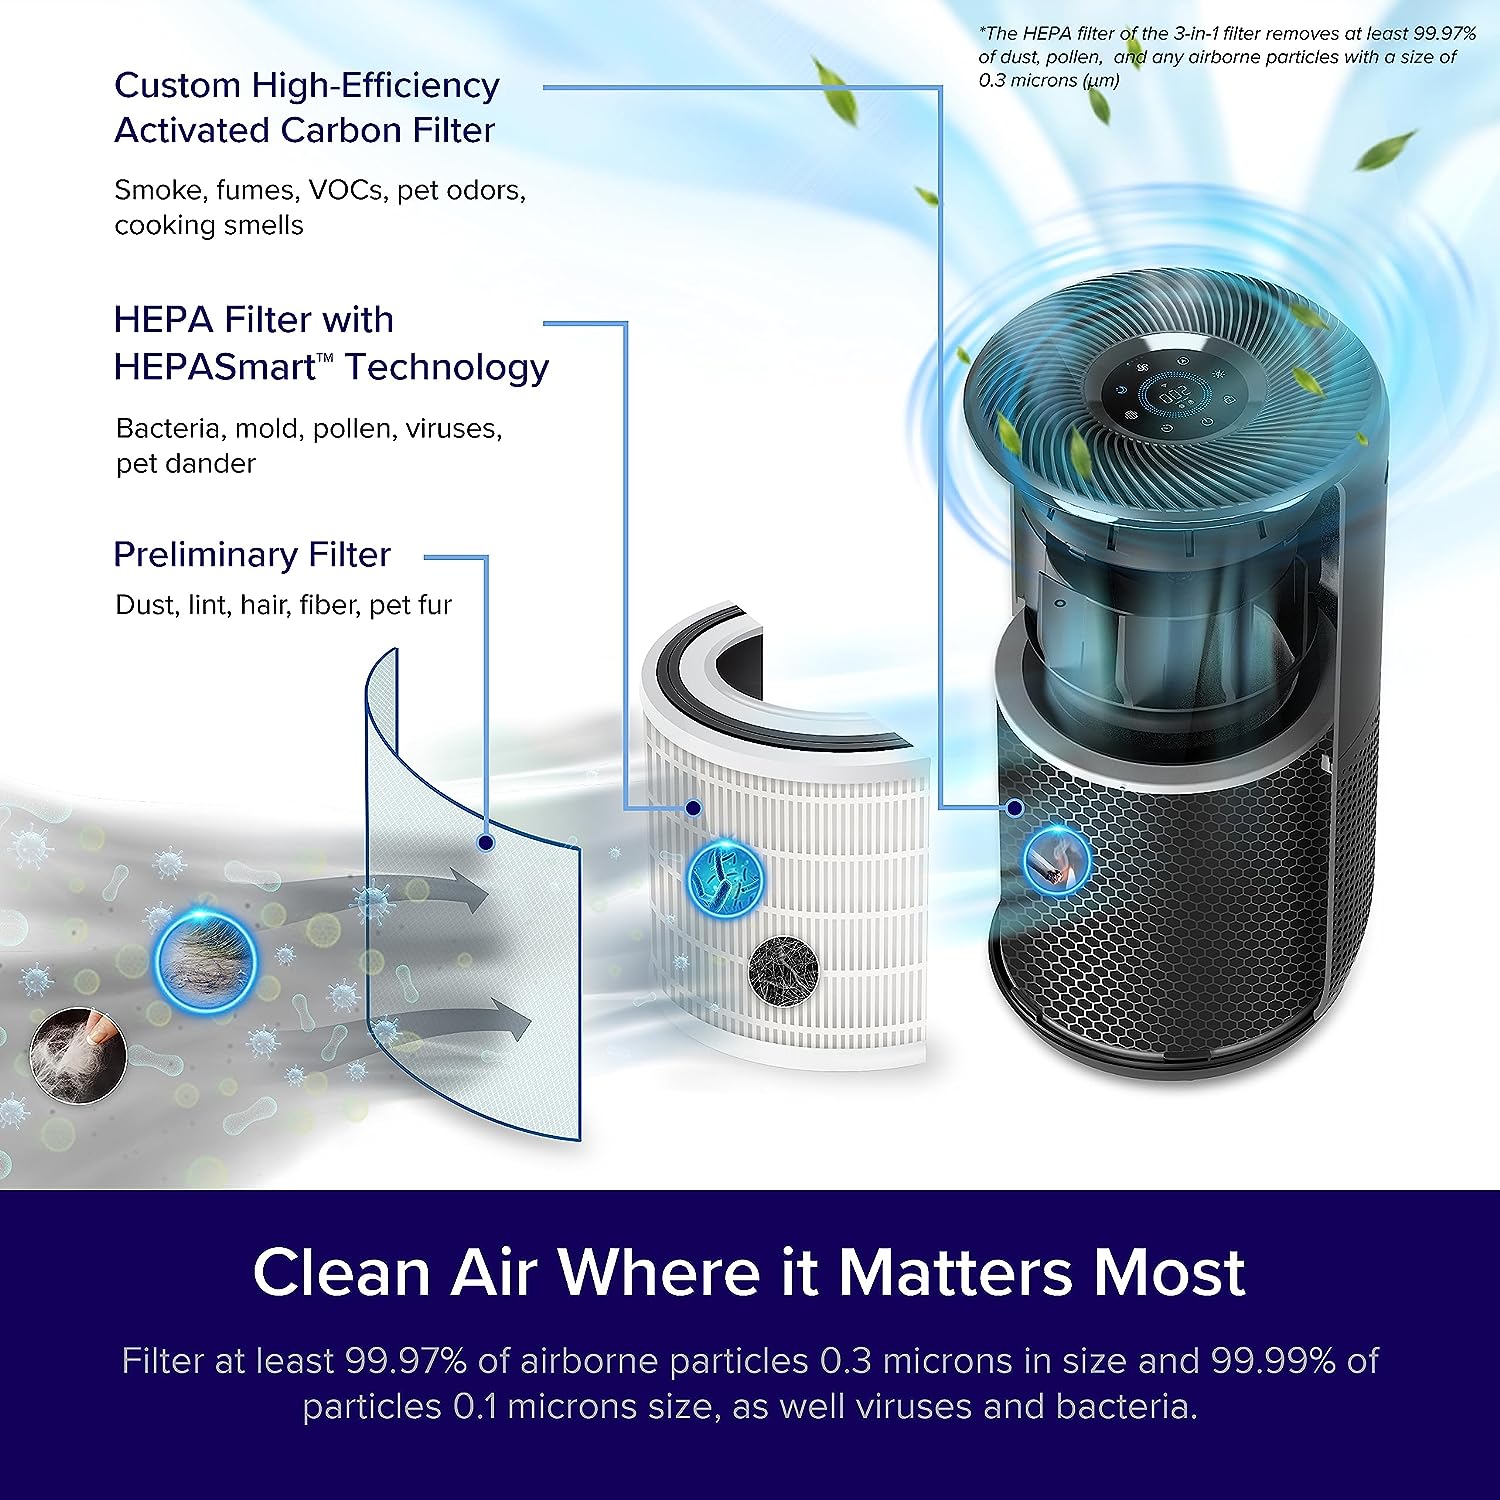 LEVOIT Air Purifiers for Home Large Room, Hepa and 3 Stage Filter Captures  Pet Allergies, Smoke, Dust, Odor, Mold and Pollen for Bedroom, Timer